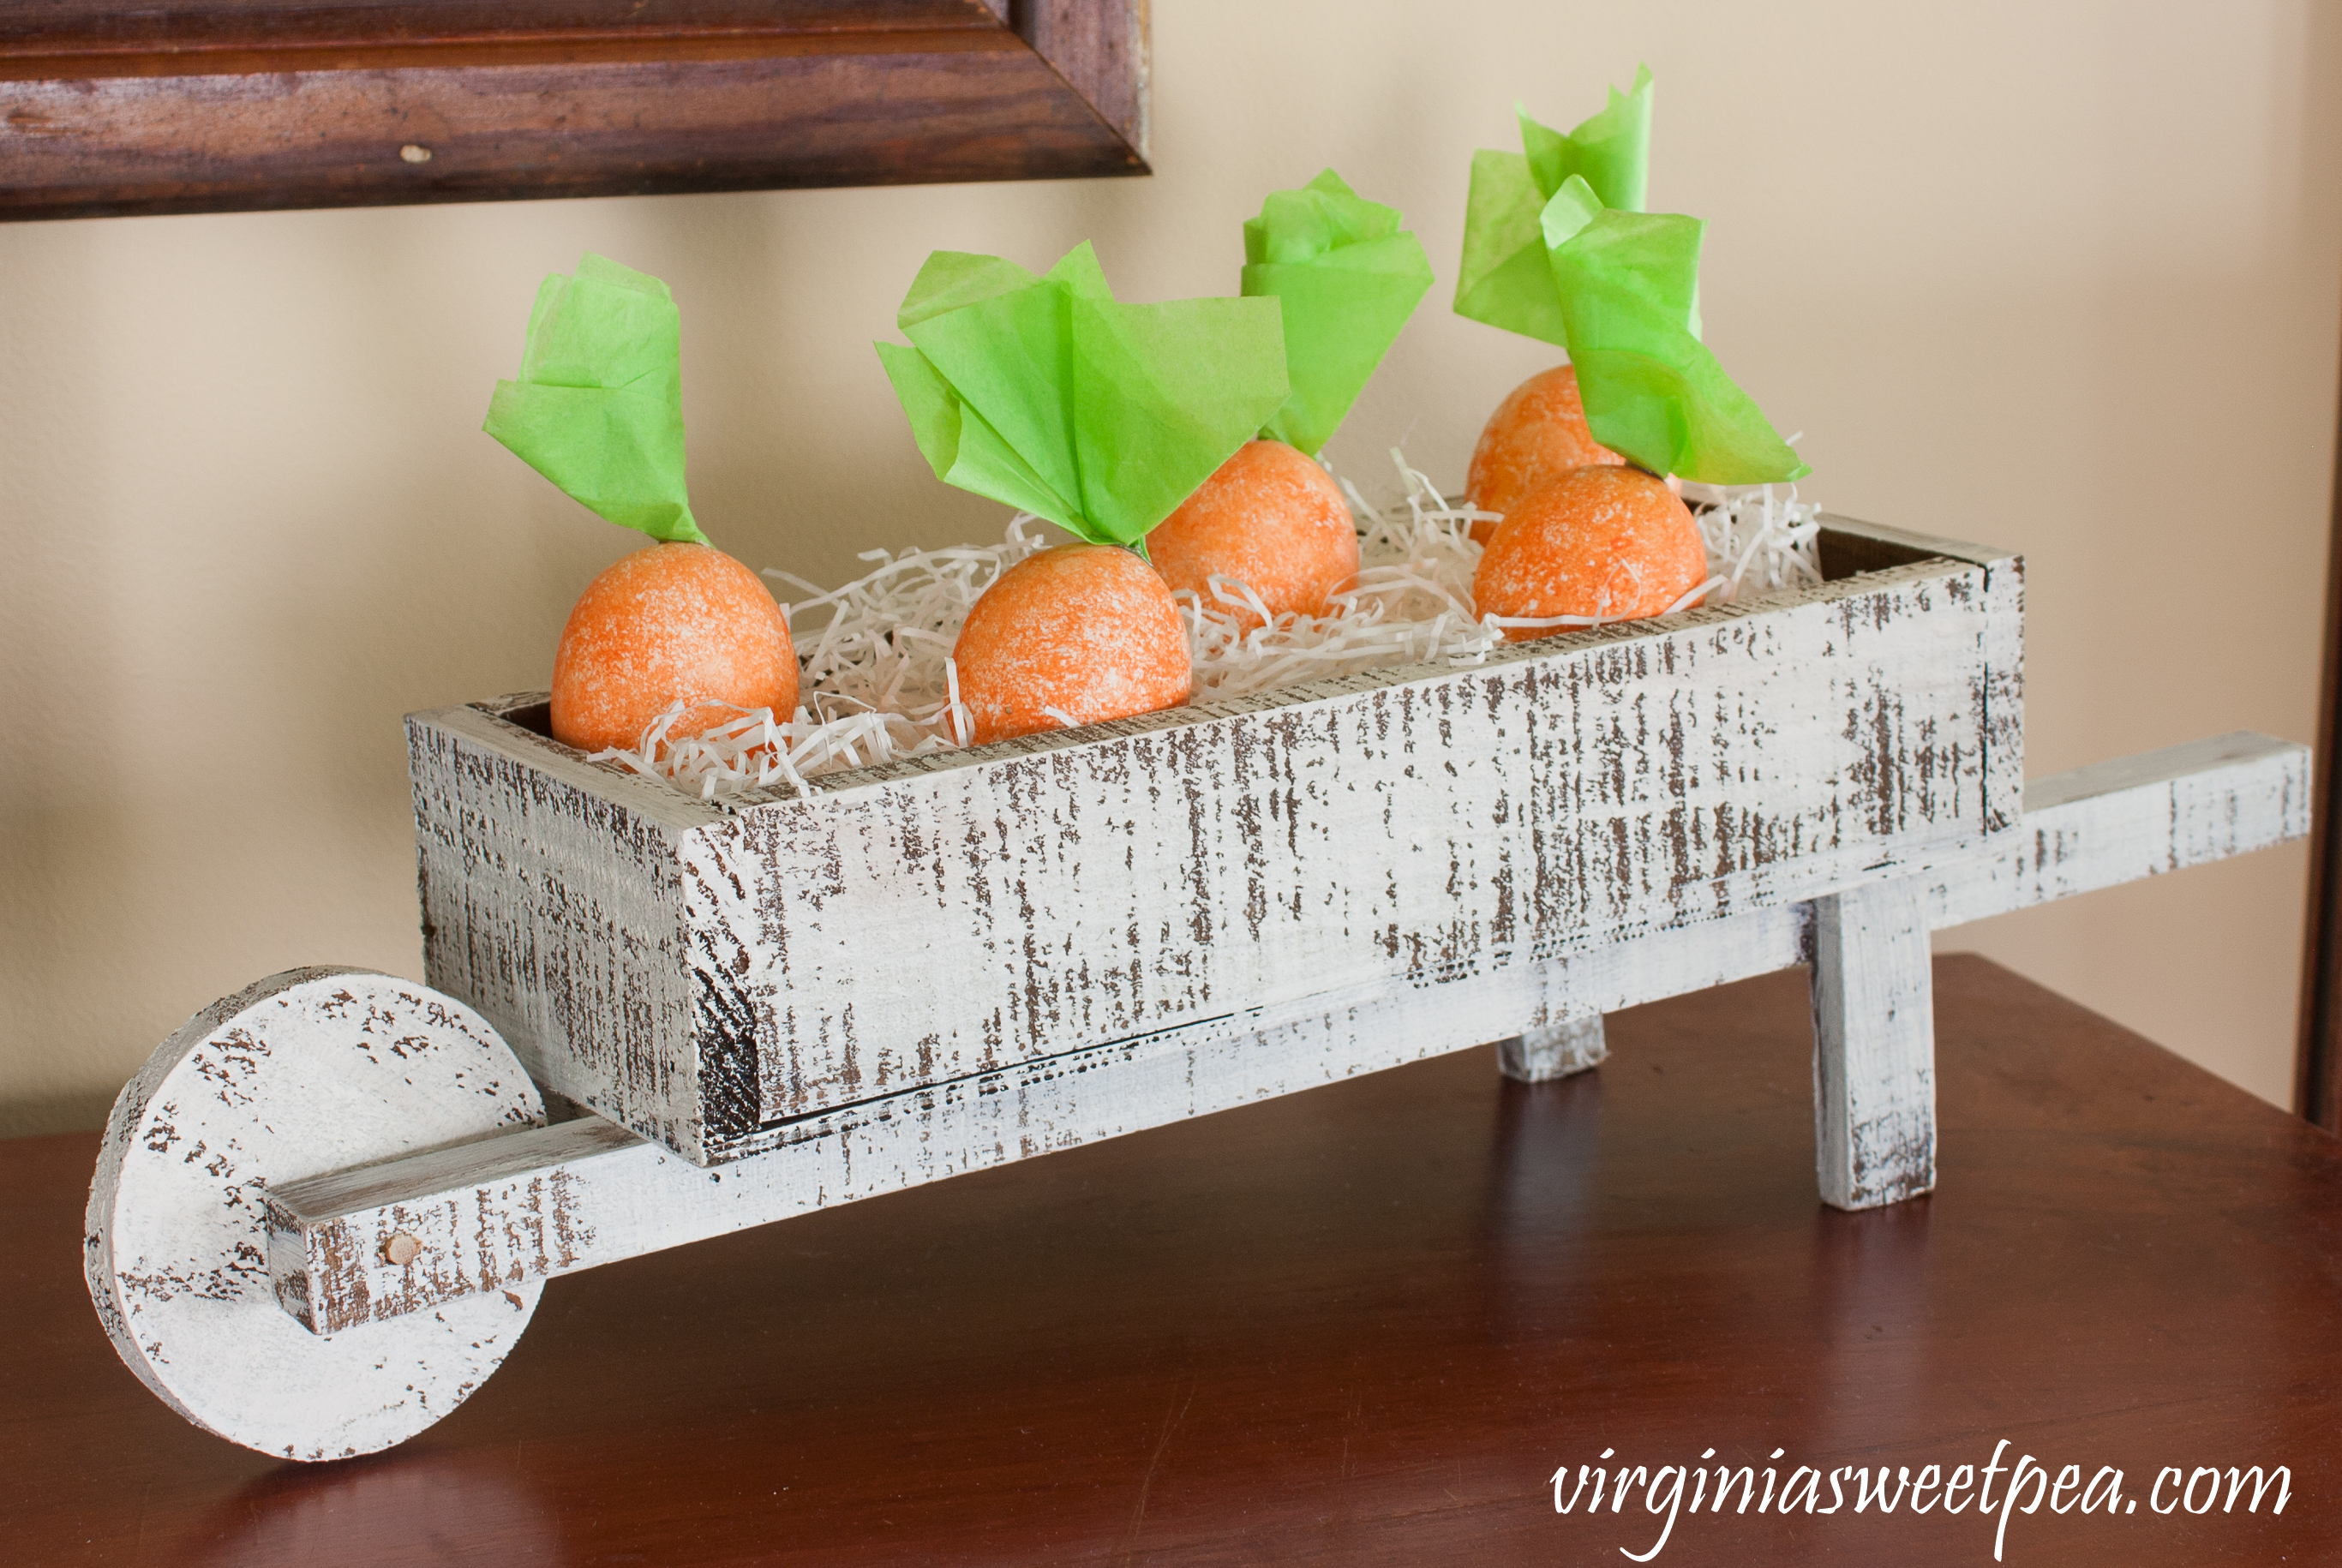 Easter Centerpiece - Small wheelbarrow filled with white paper shreds and carrot Easter eggs